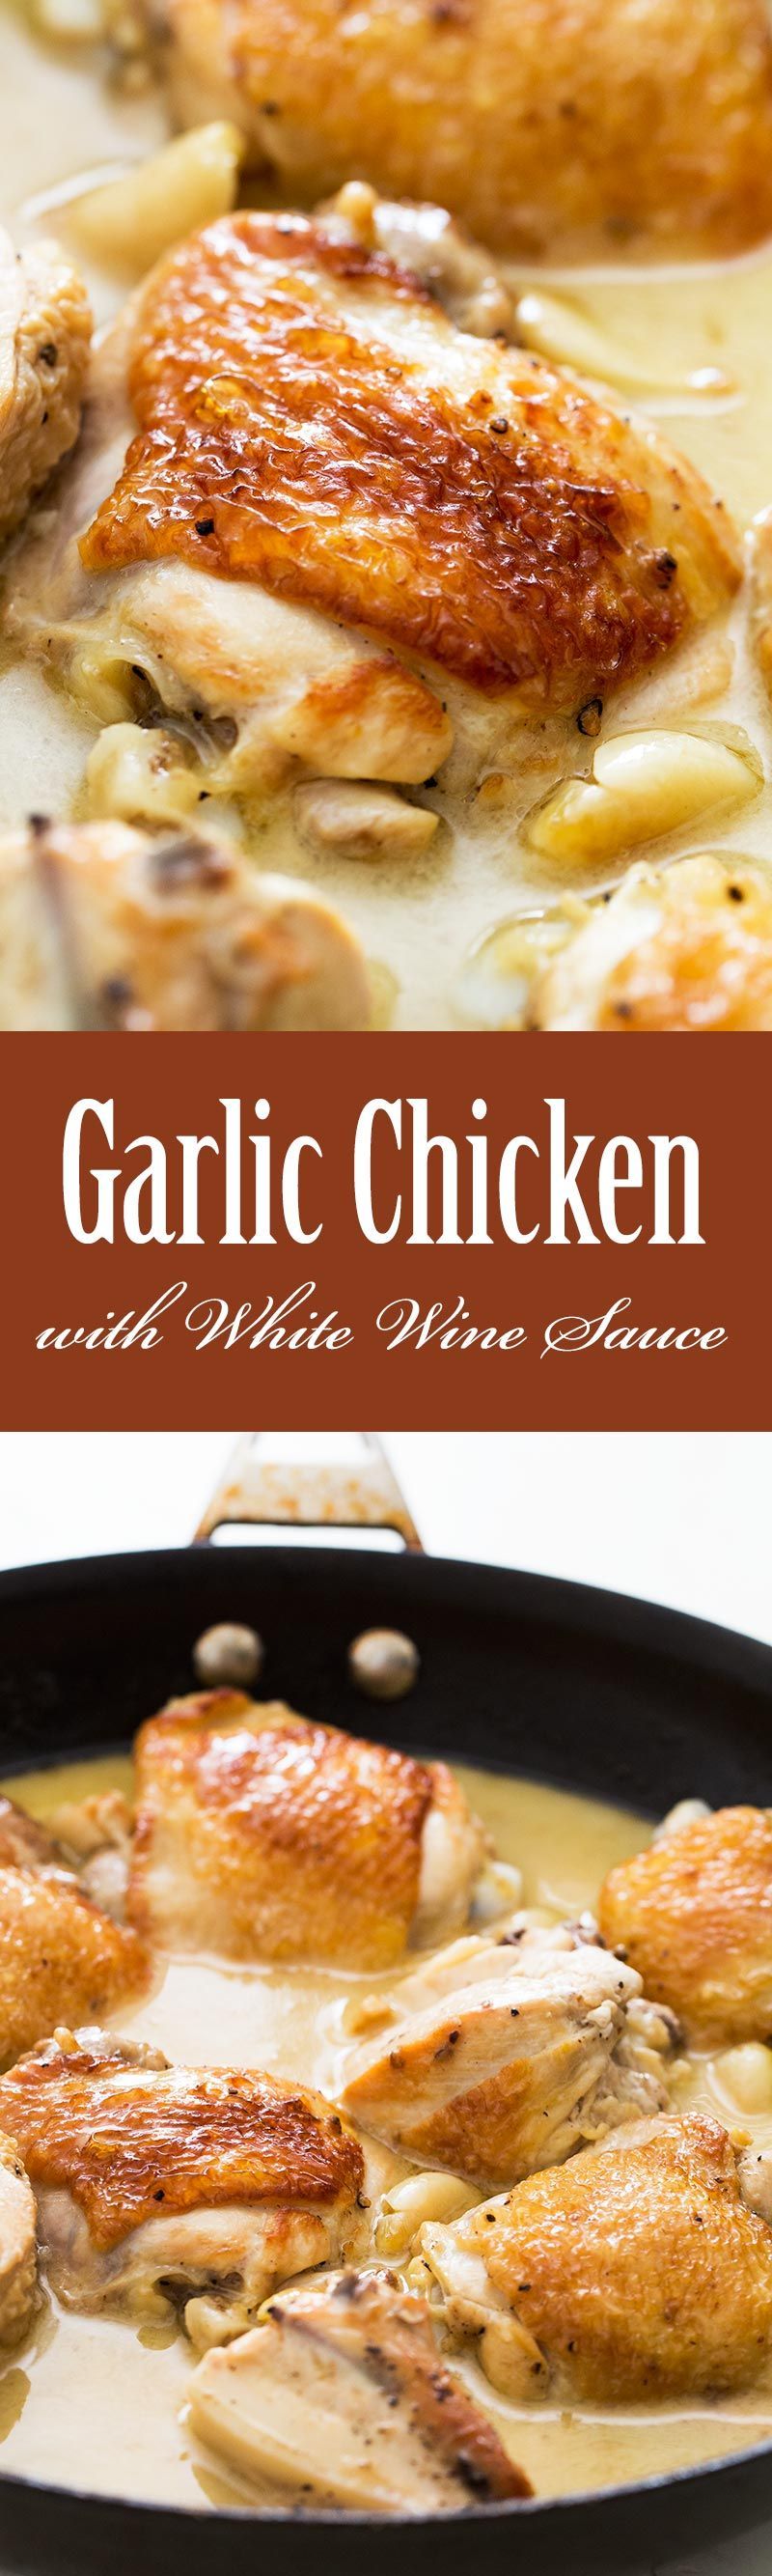 One Pan Stovetop 40 Clove Garlic Chicken! Chicken browned first in olive oil, then braised in white wine s